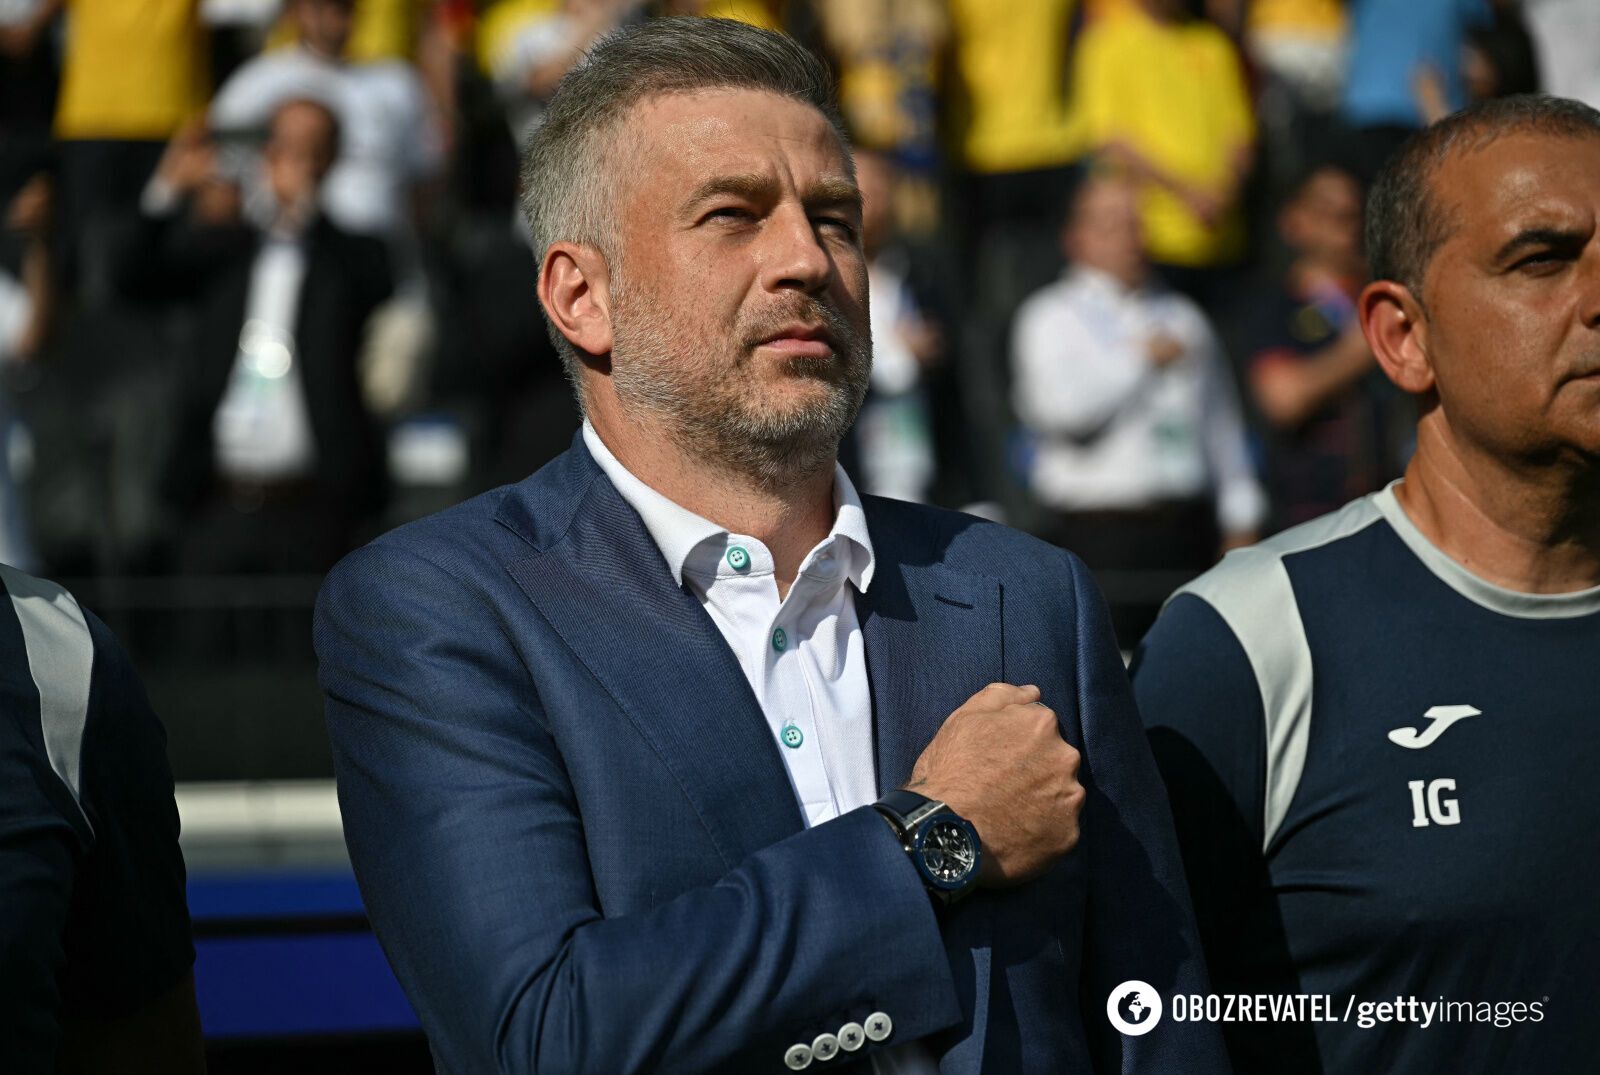 Waiting for an apology: Romania national team coach responds to the accusations of conspiracy against Ukraine at Euro 2024